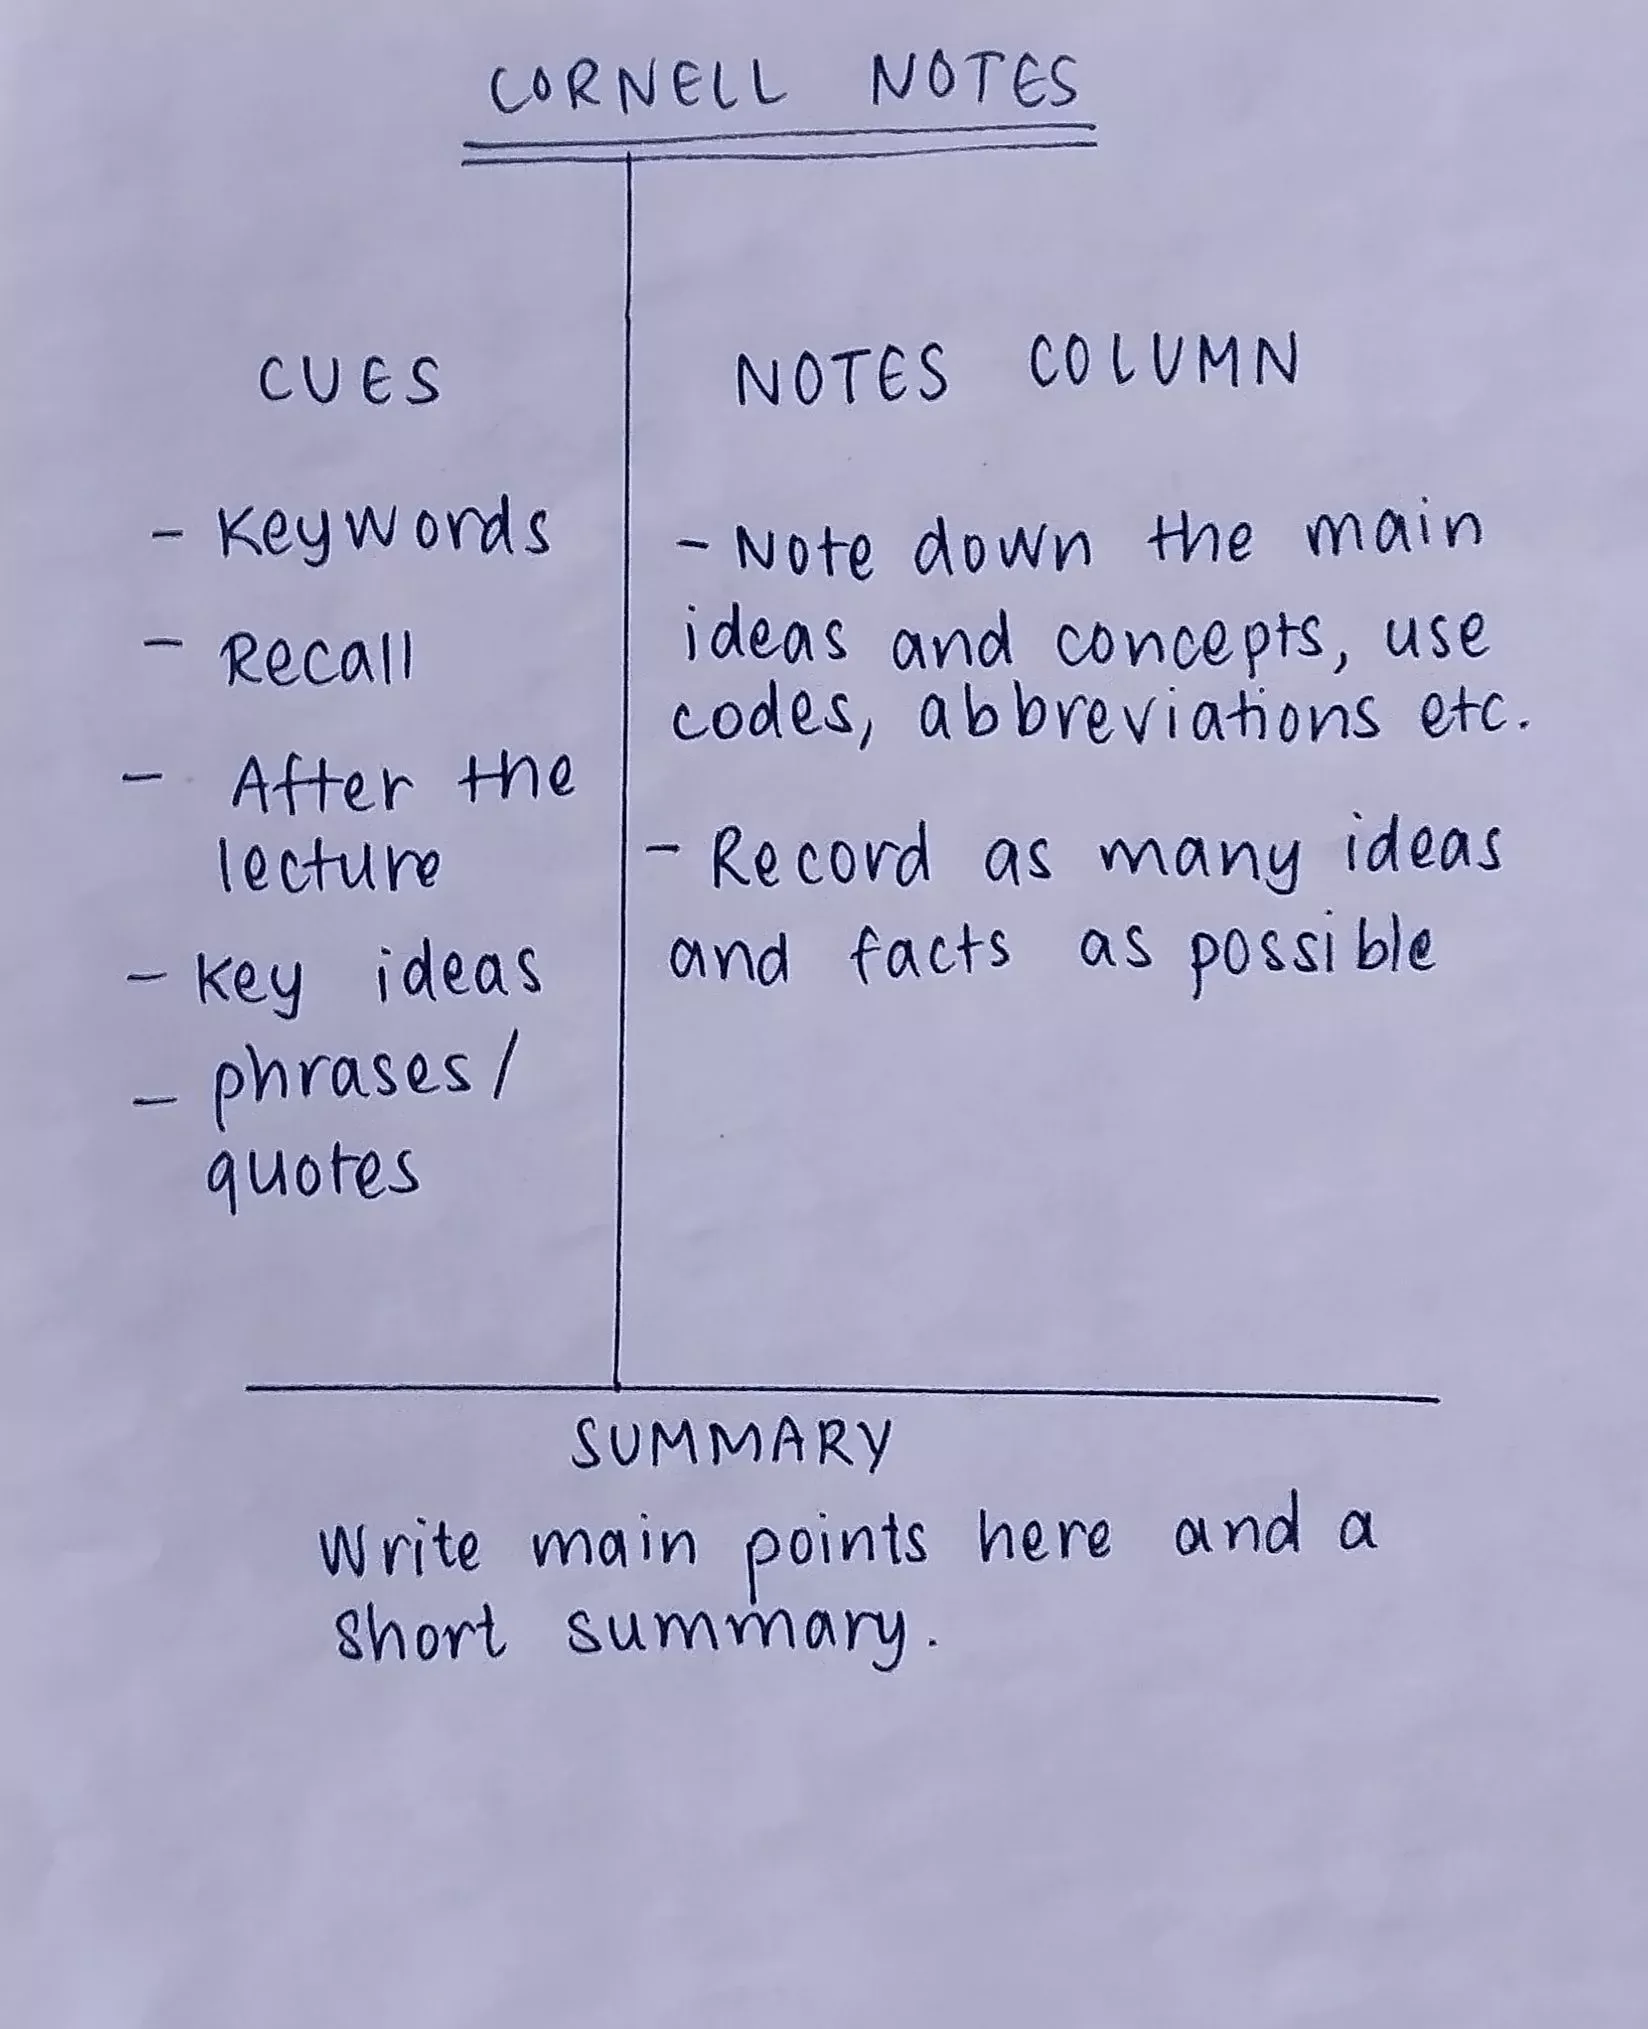 Cornell notes 